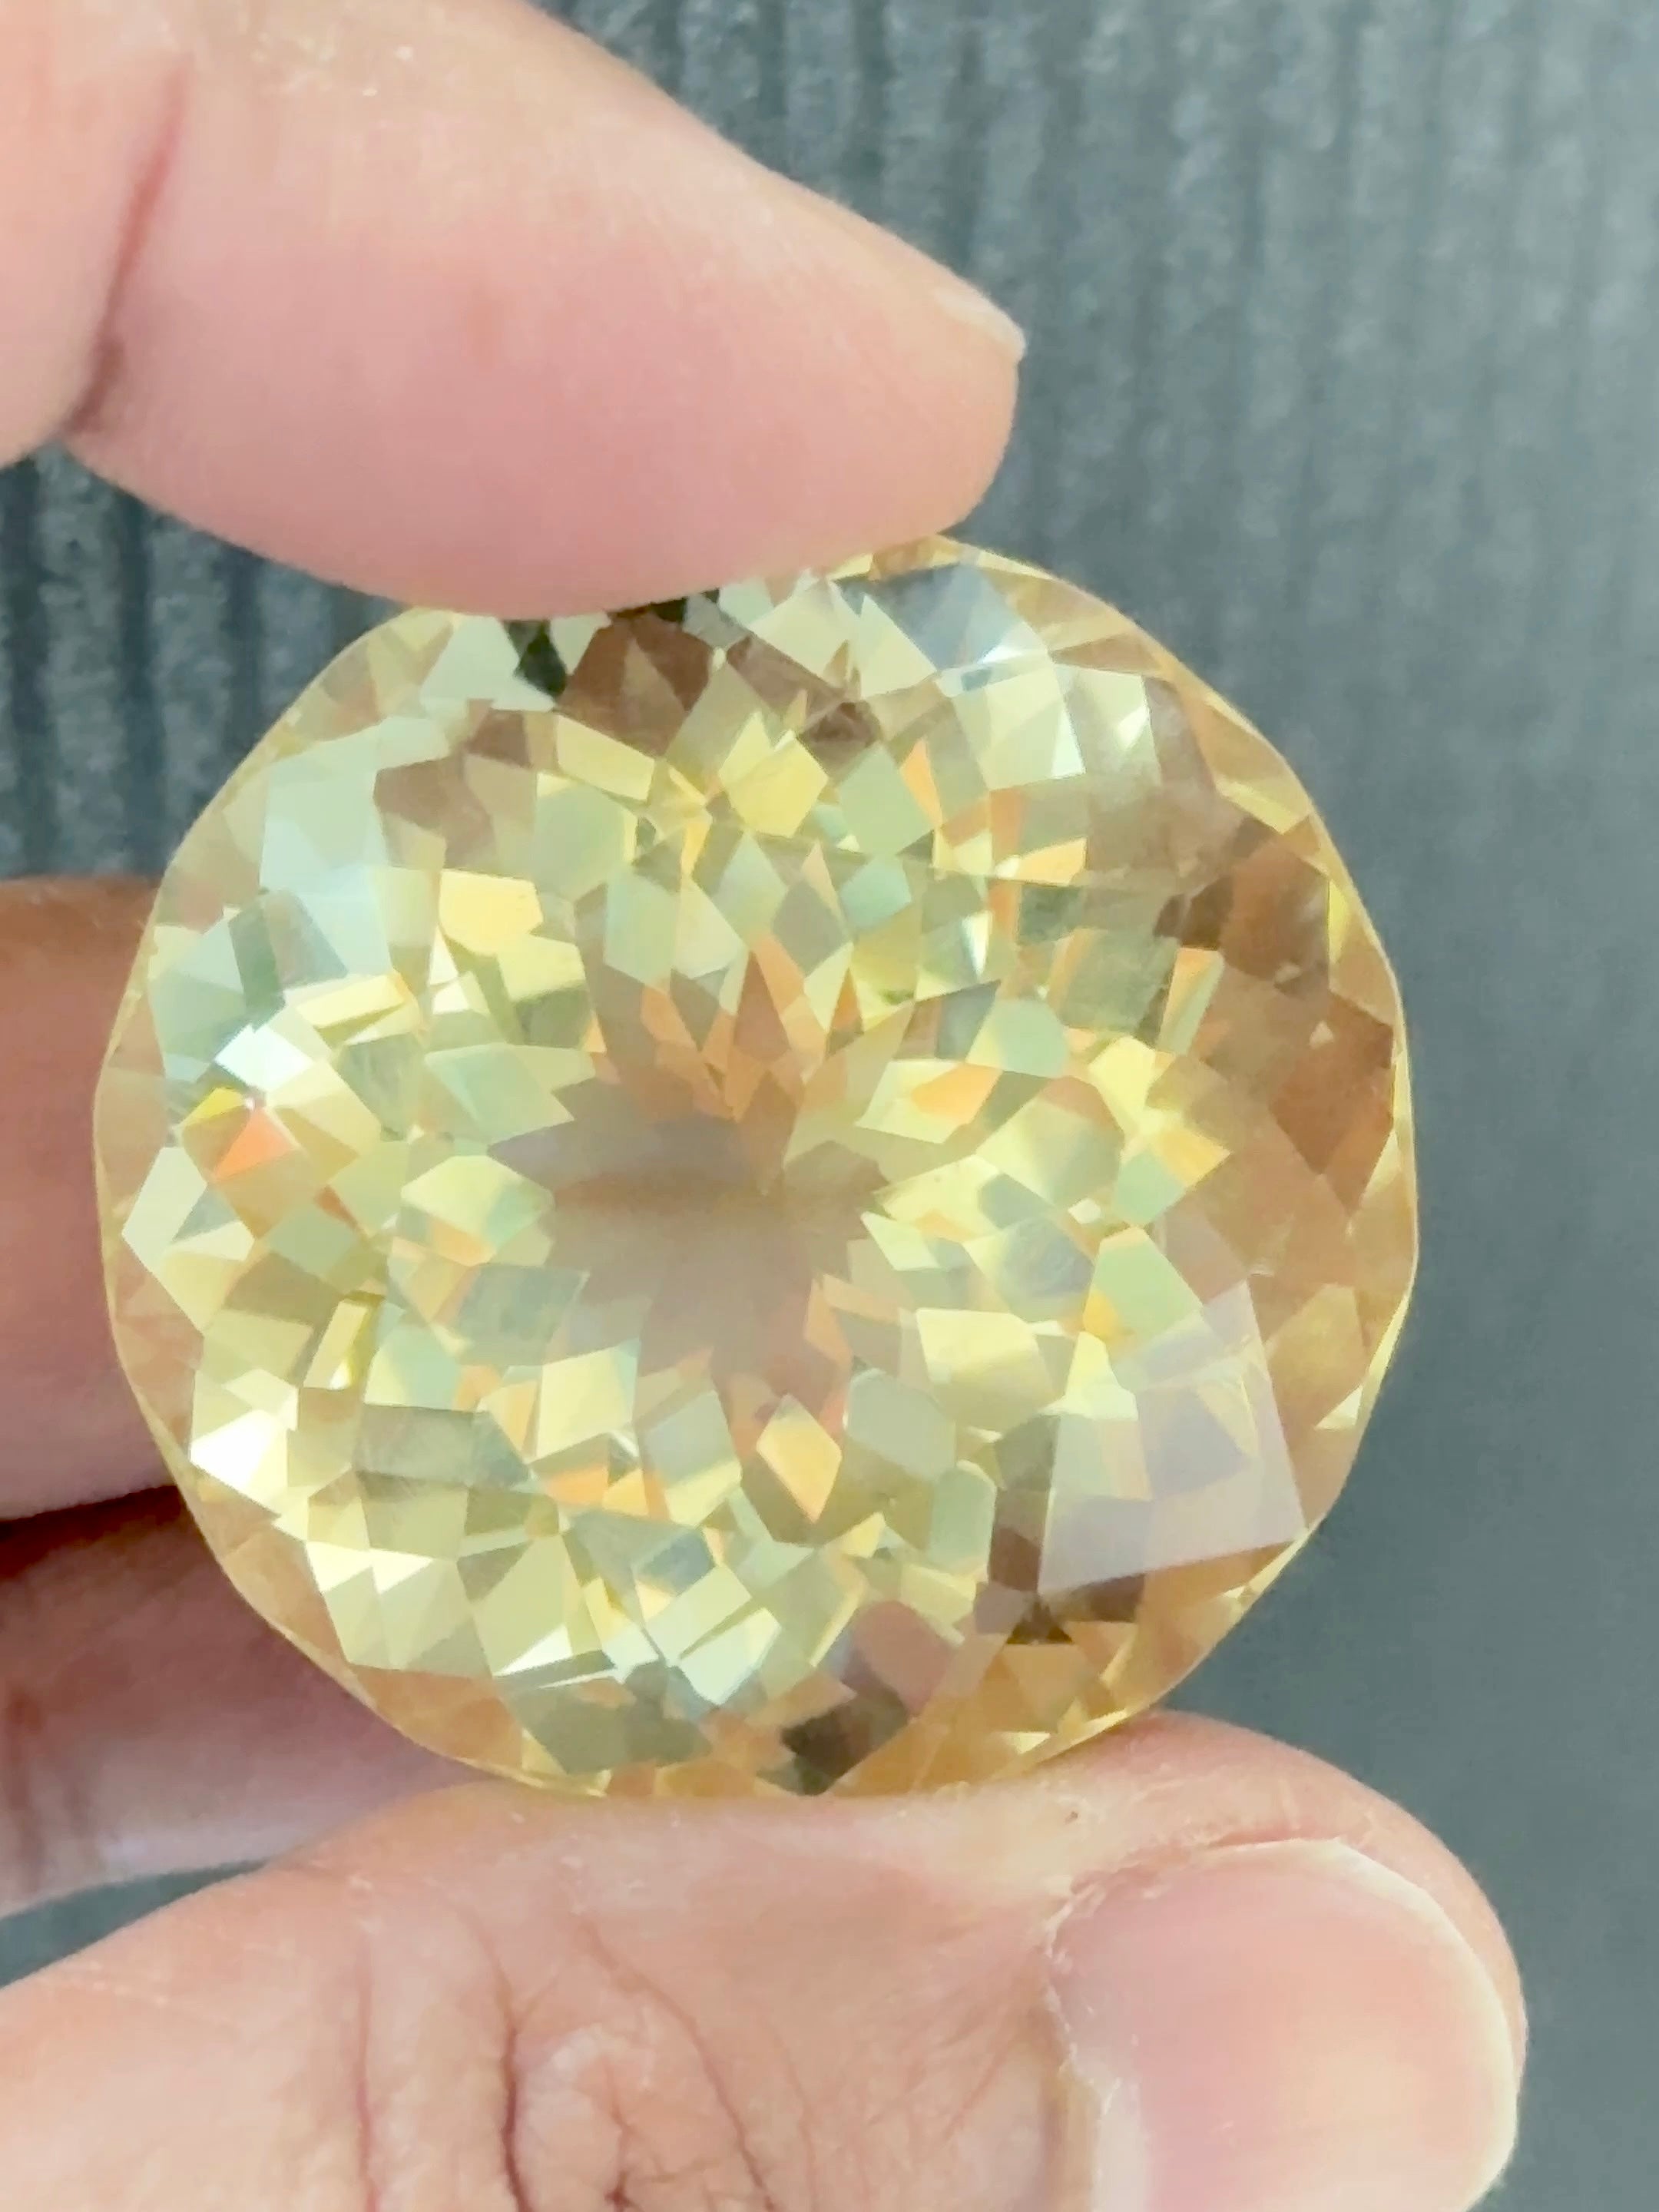 154.79ct Congo Citrine, Untreated Unheated. Native cut, culet slightly damaged, not easily noticeable, see pics and vid, 35.10 x 24.60mm, I had to show this one in all different lights